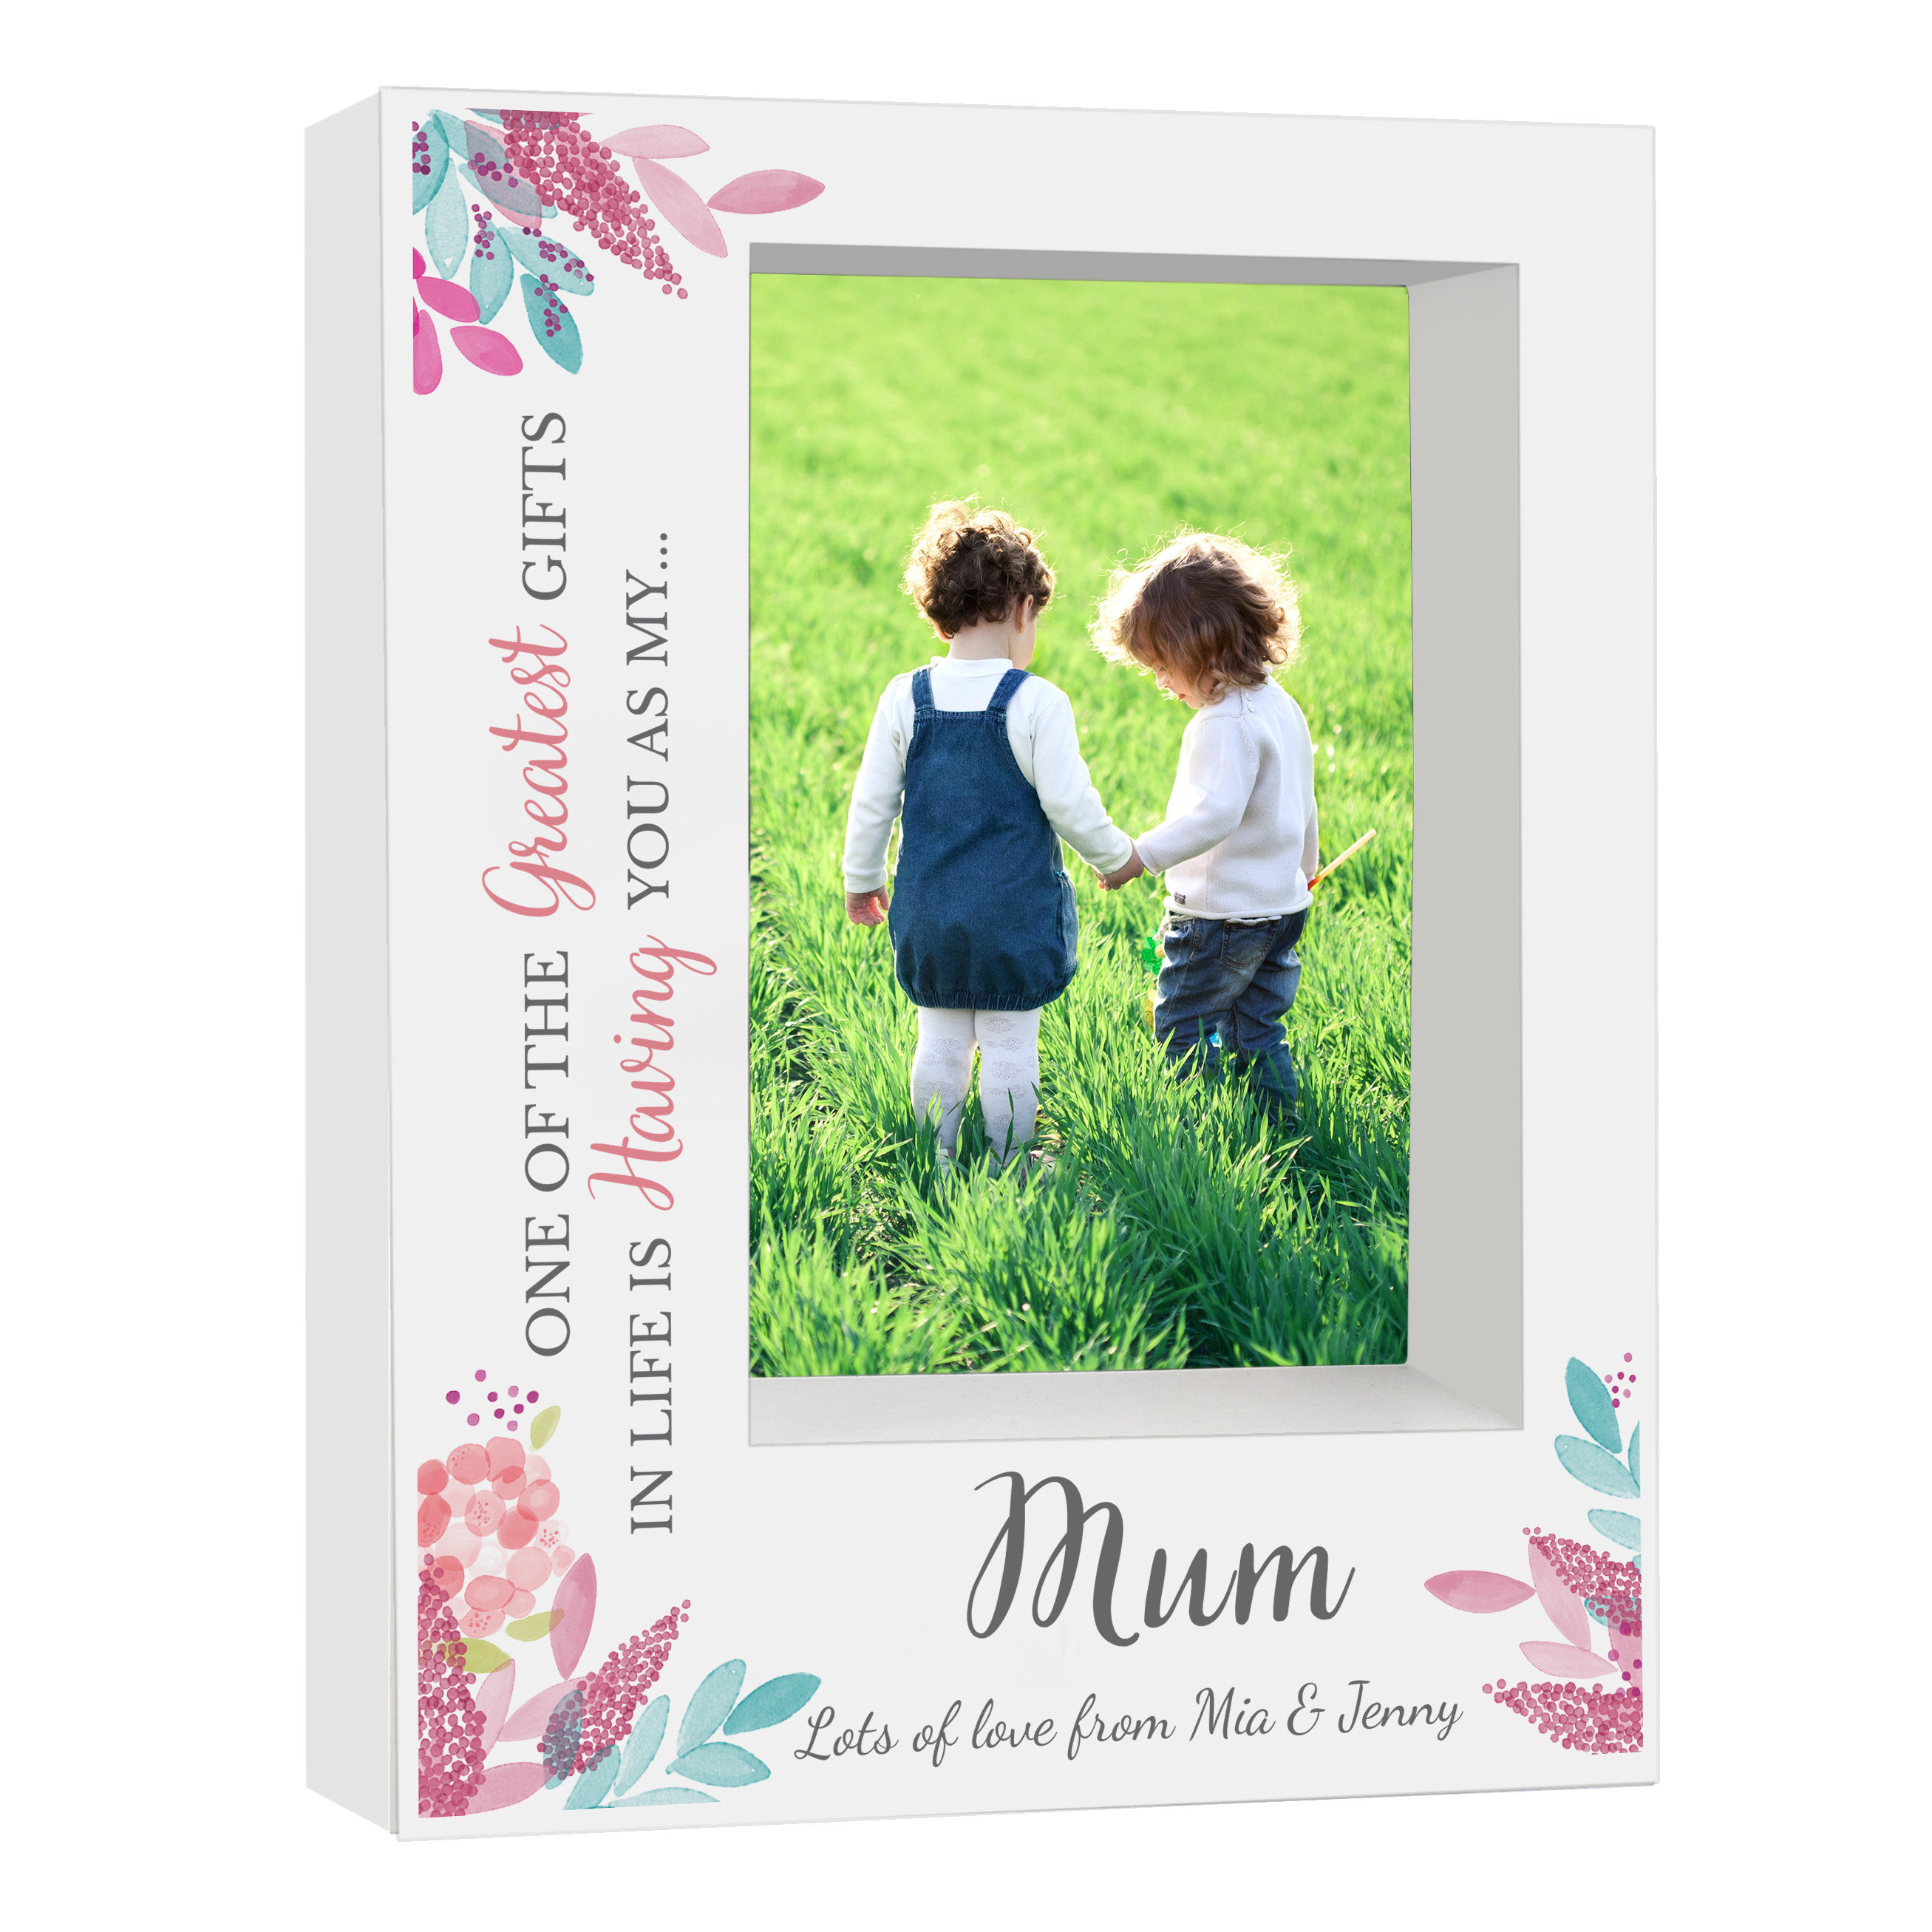 Personalised Box Photo Frame - One Of The Greatest Gifts In Life...